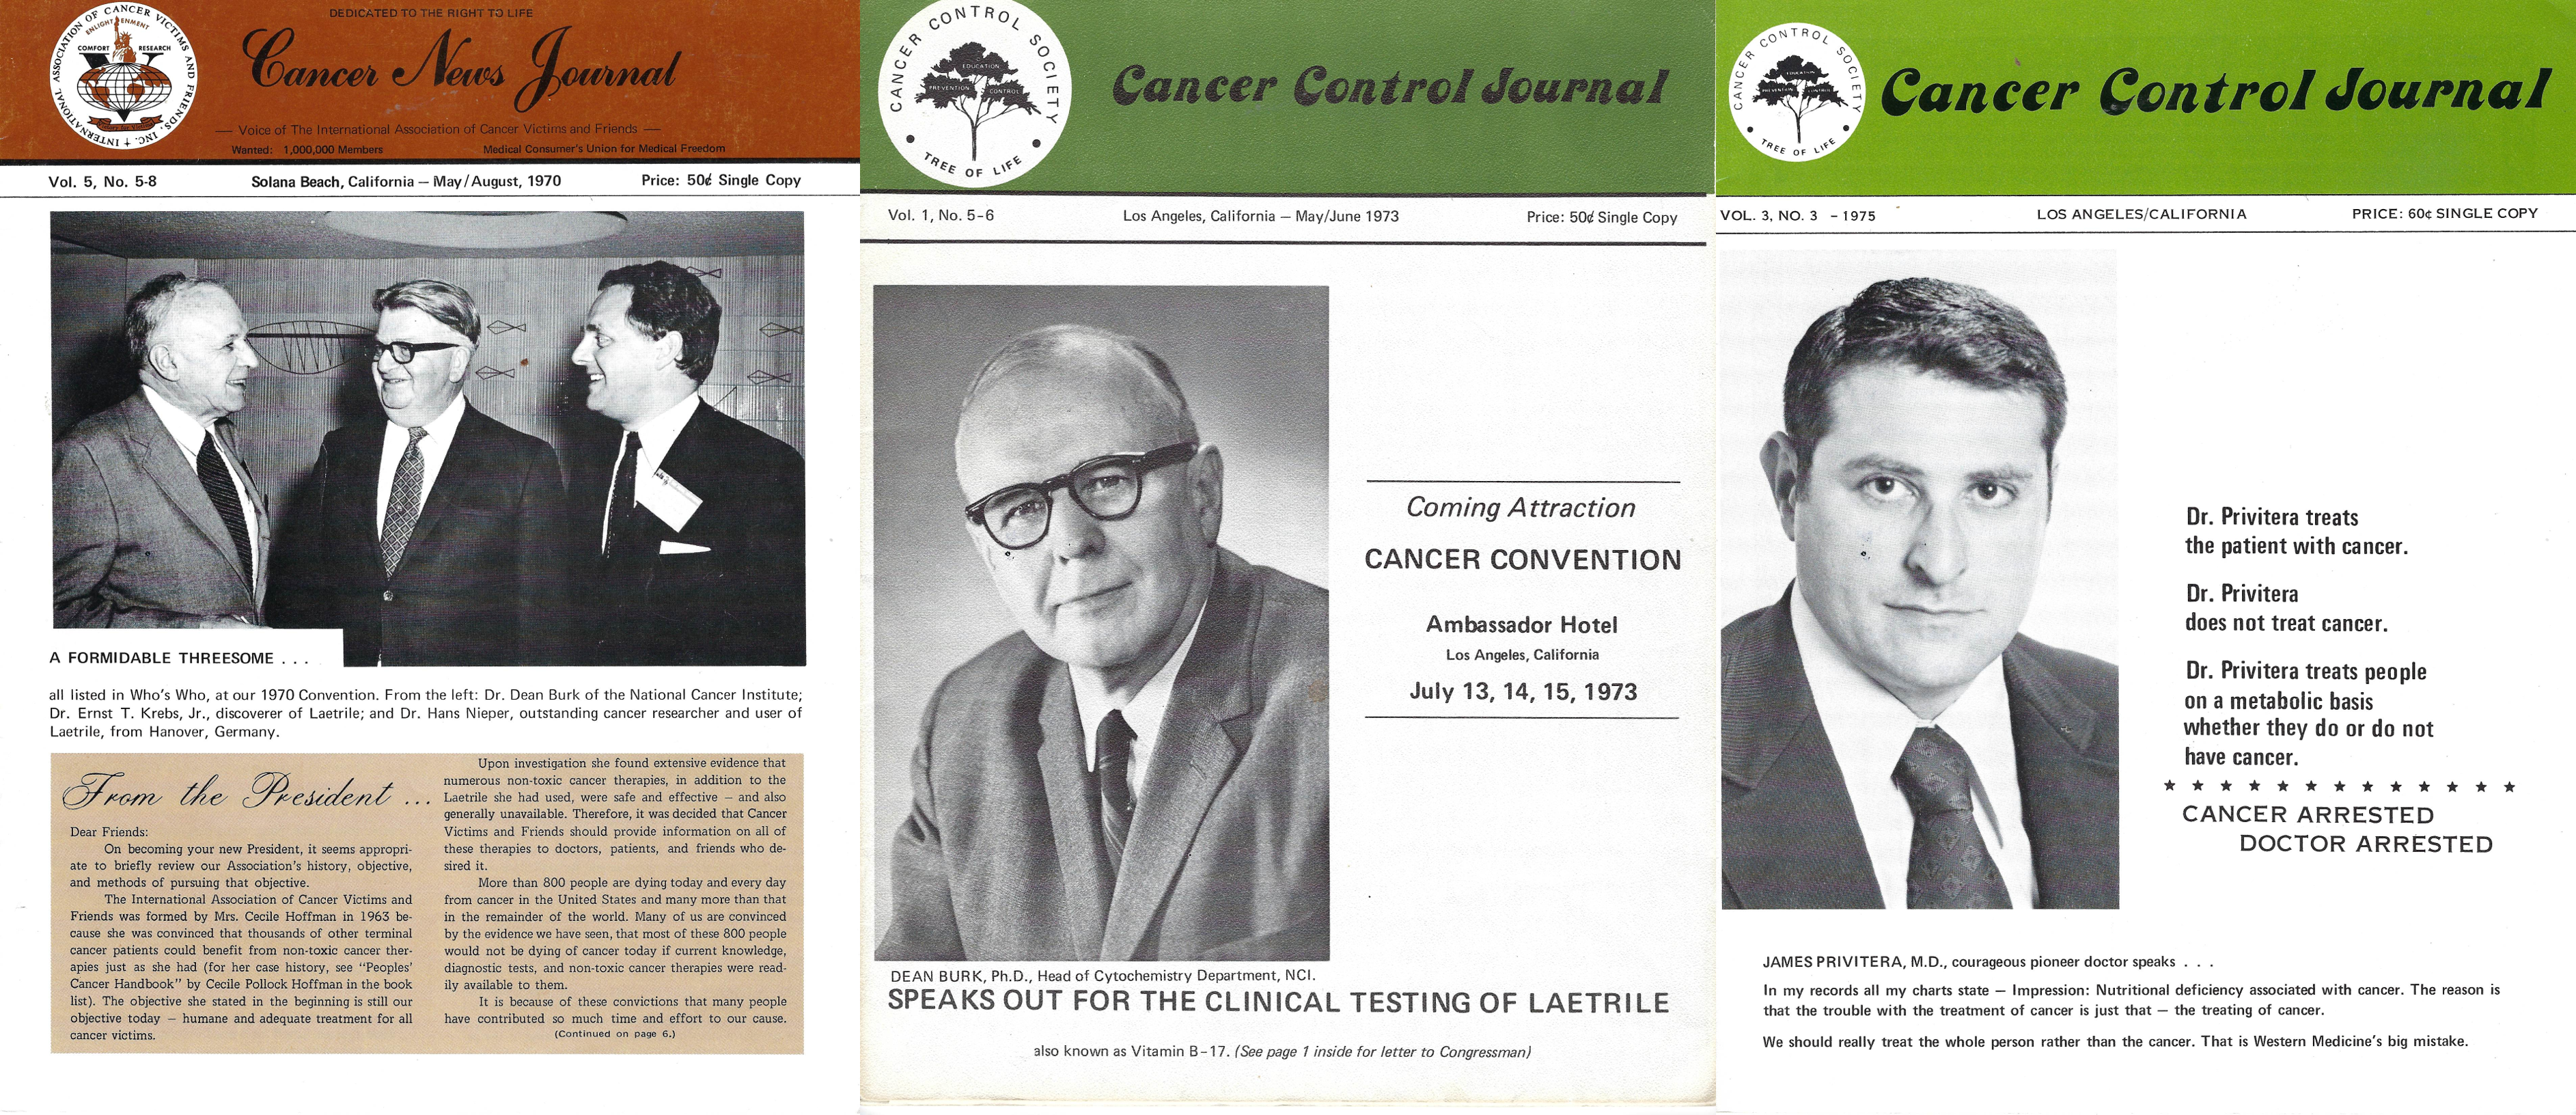 (PDF) 1970s Newsletters-Cancer News Journal/Cancer Control Journal (set of three, 24 pages each)